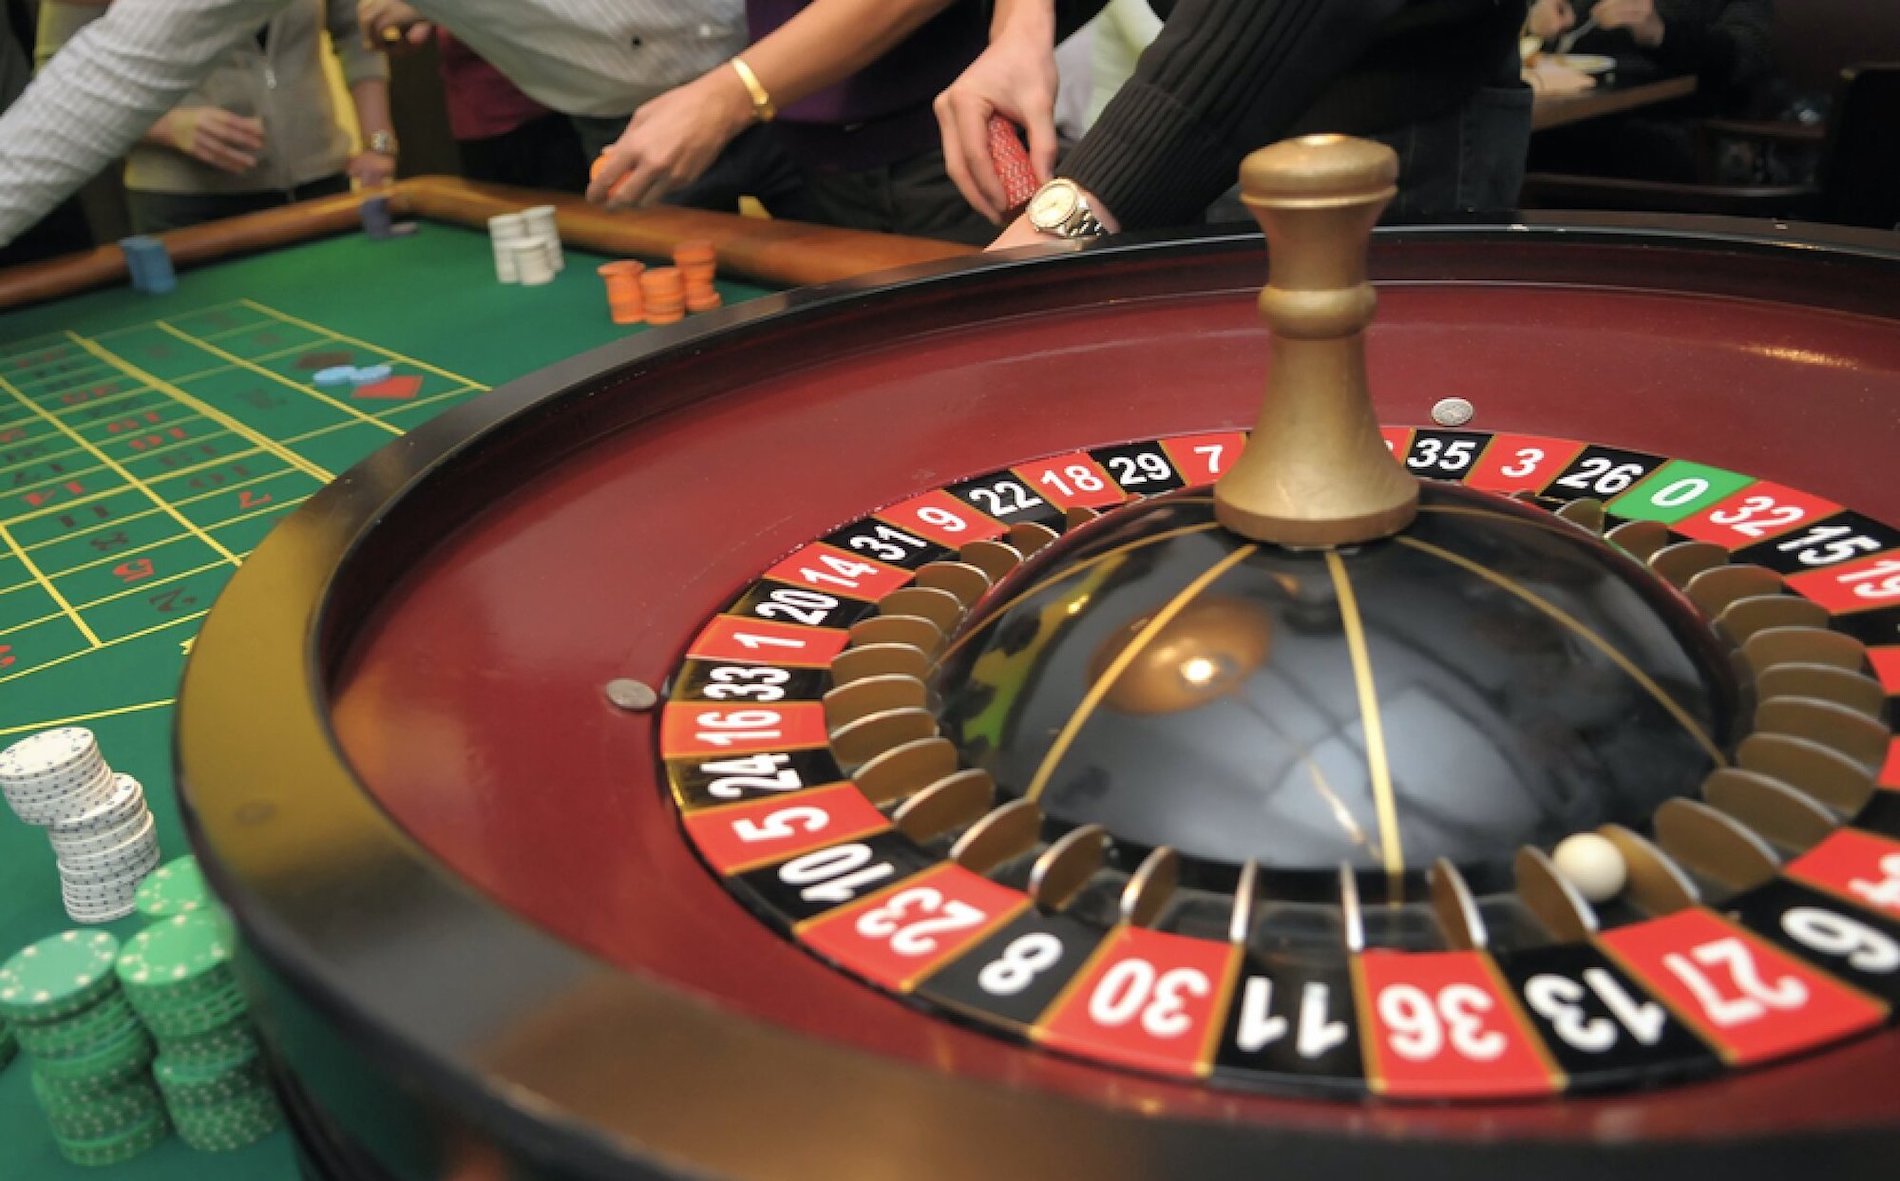 Playing live roulette online is just as thrilling as playing in person at a casino. Find out what are the best bets you can place online in order to win big from any game!